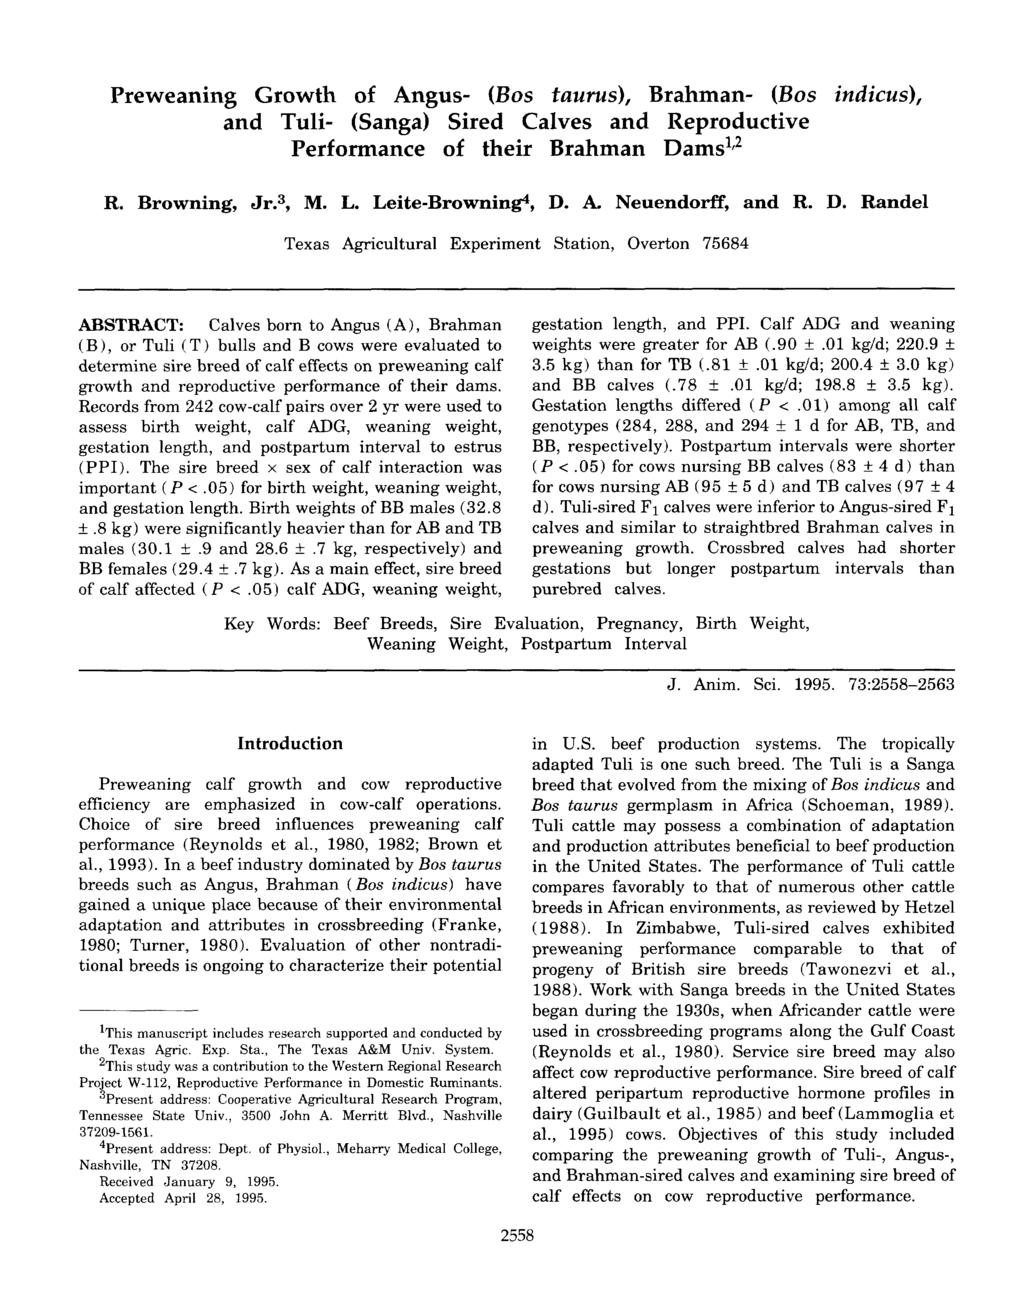 Preweaning Growth of Angus- (Bus taums), Brahman- (Bus indictrs), and Tuli- (Sanga) Sired Calves and Reproductive Performance of their Brahman Dams! R. Browning, Jr.3, M. L. Leite-Brownine, D. A. Neuendorff, and R.